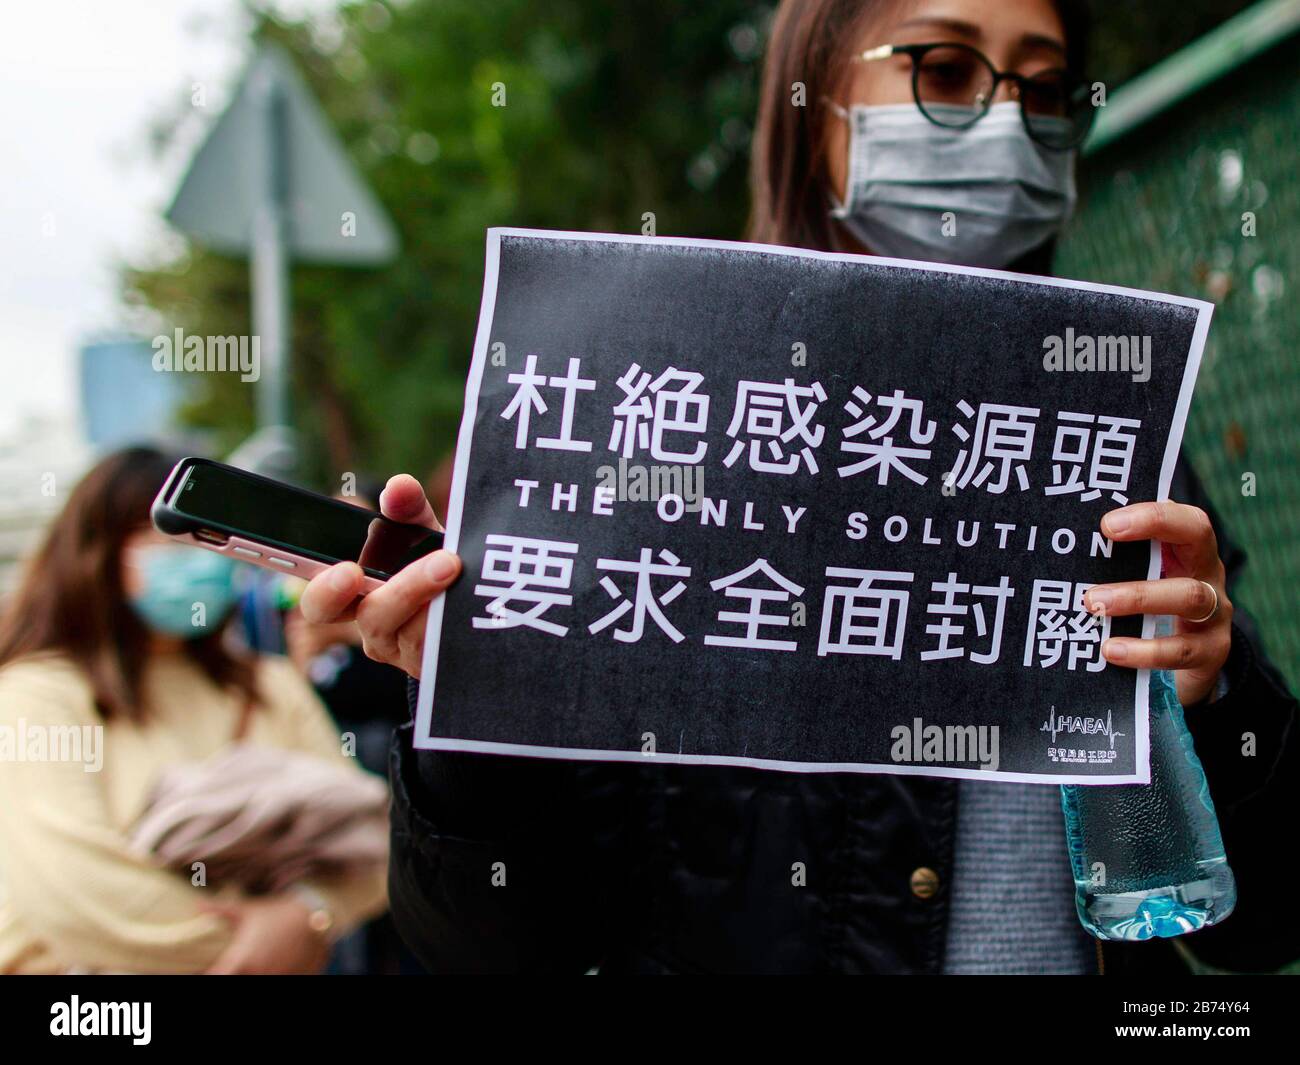 Medical professionals want to close the border to stop mainland Chinese to come to Hong Kong More than 7000 medical professionals go on strike today. A thirty-nine year old man in Hong Kong believed to have been the first victim of the Coronavirus. Stock Photo